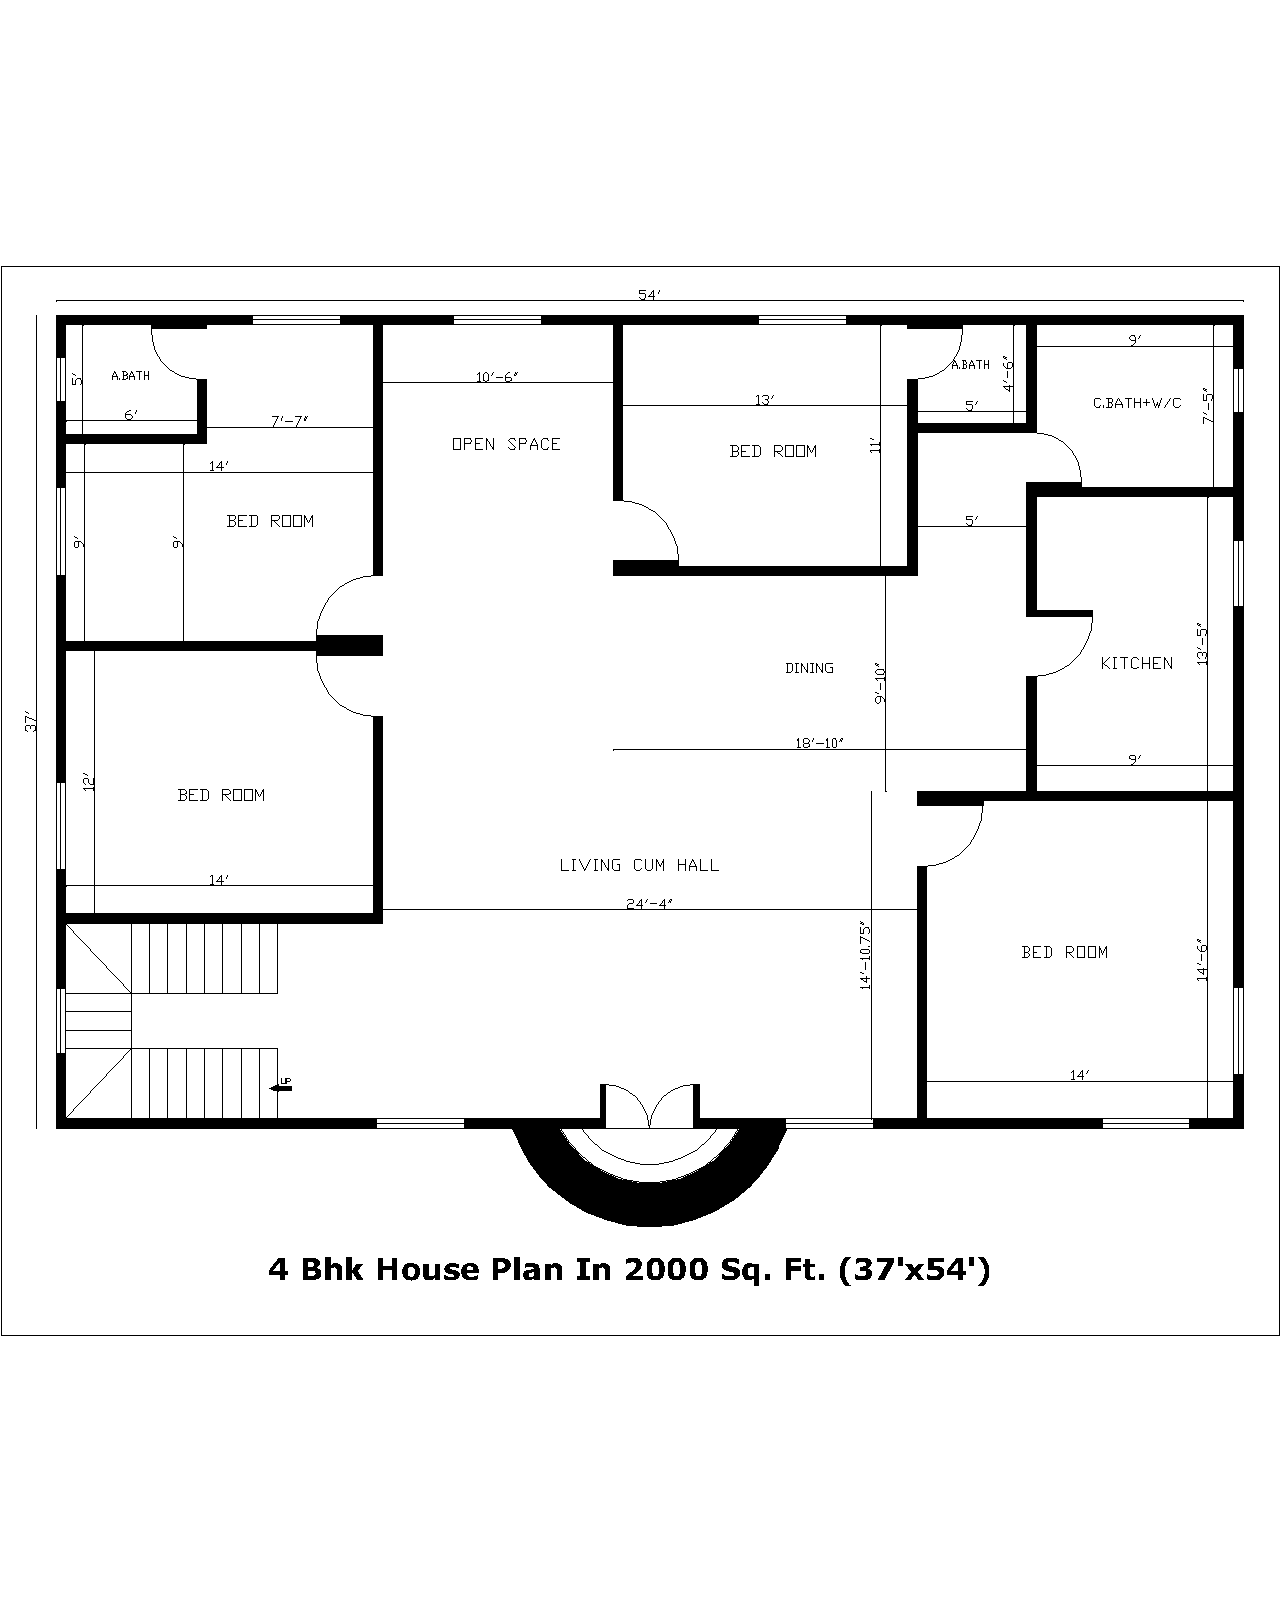 4 Bhk House Plan In 2000 Sq. Ft. (37'x54')